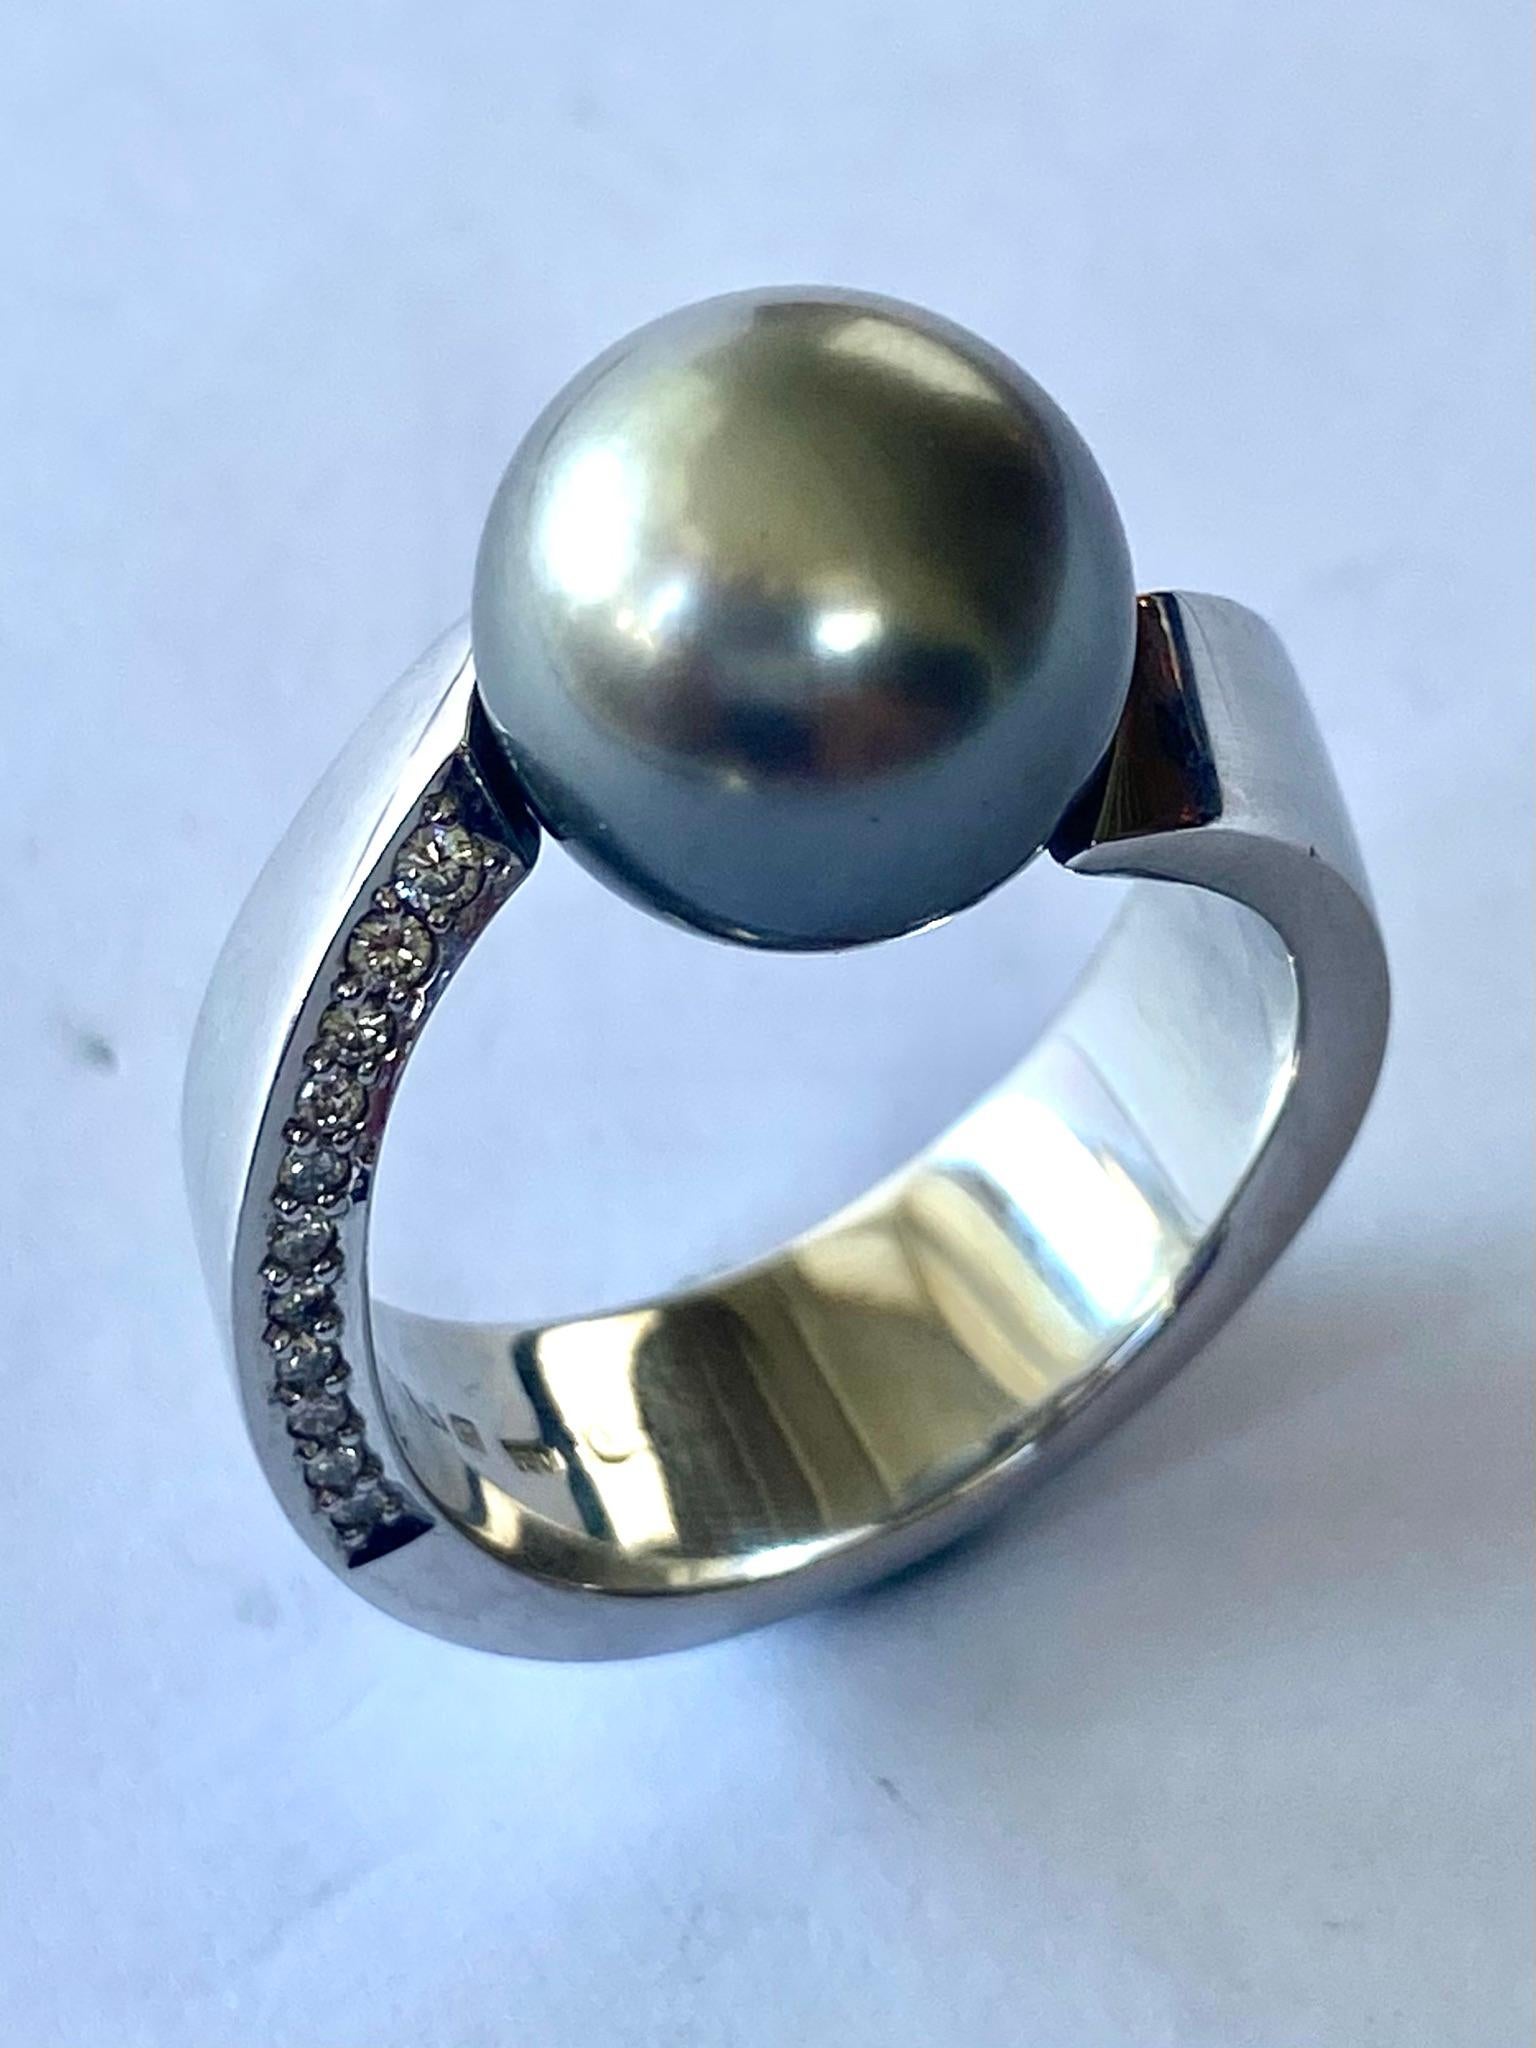 One (1) 18 Karat Gold ring stamped 750 and Cs = Schoeffel  Stuttgart Germany
One (1) Spheoid Cut Center Cultered Pearl (Tahity Type) of  11.5 -12 mm   = 13.02 ct
Twenty Two (22) Roudn Briljnat Cut diamonds = 0.24 ct  VS  -  F-G
Total Weight of the